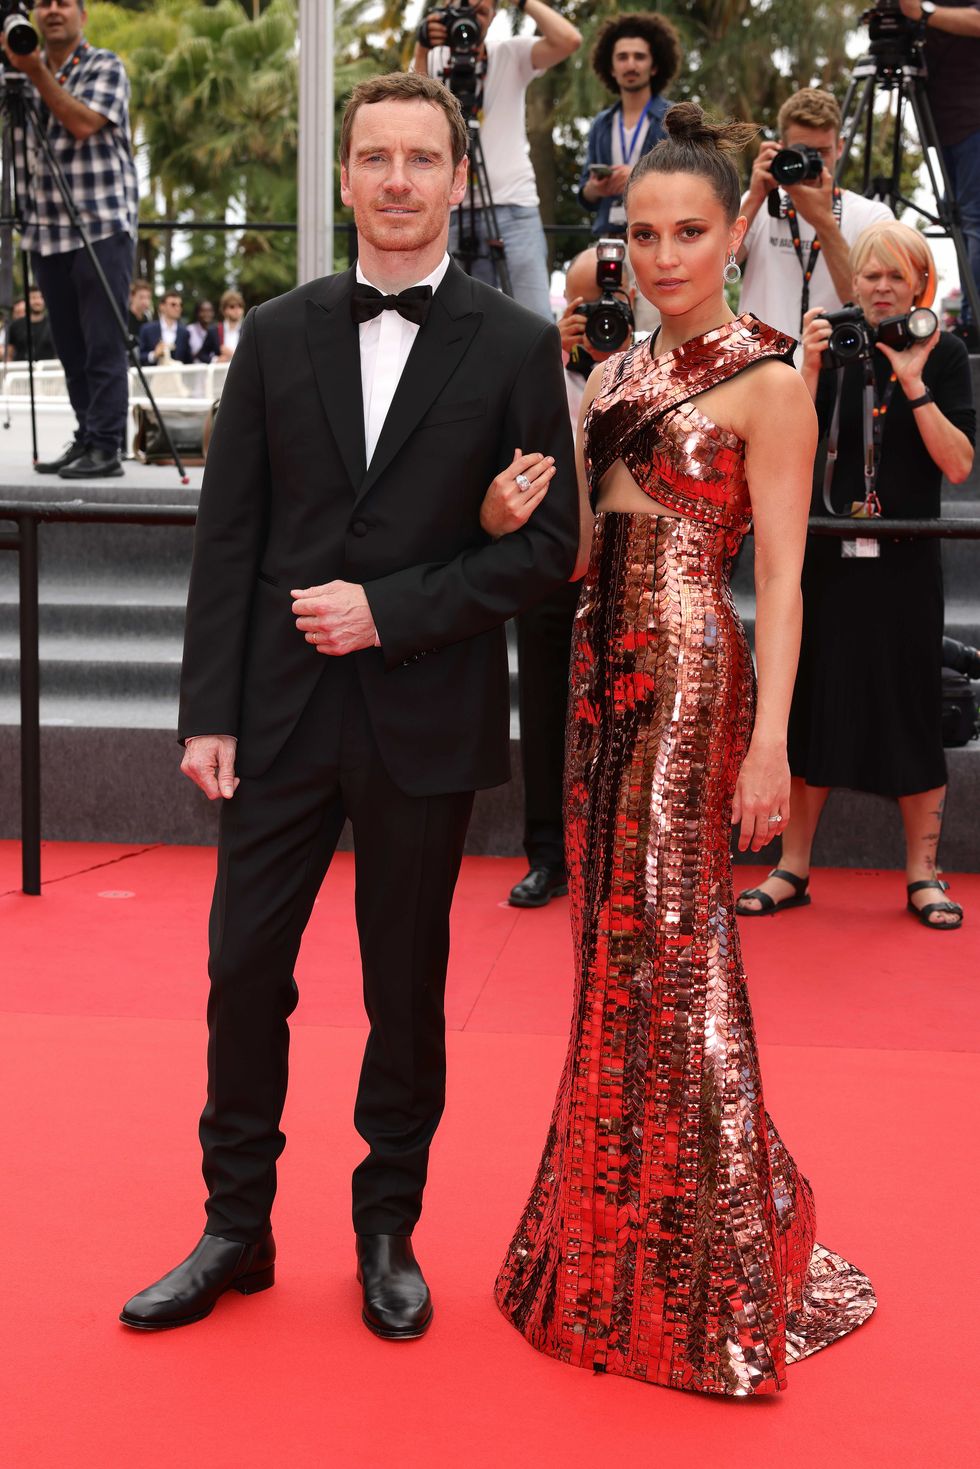 michael fassbender and alicia vikander attend the screening of "holy spider" during the 75th annual cannes film festival at palais des festivals on may 22, 2022 in cannes, france